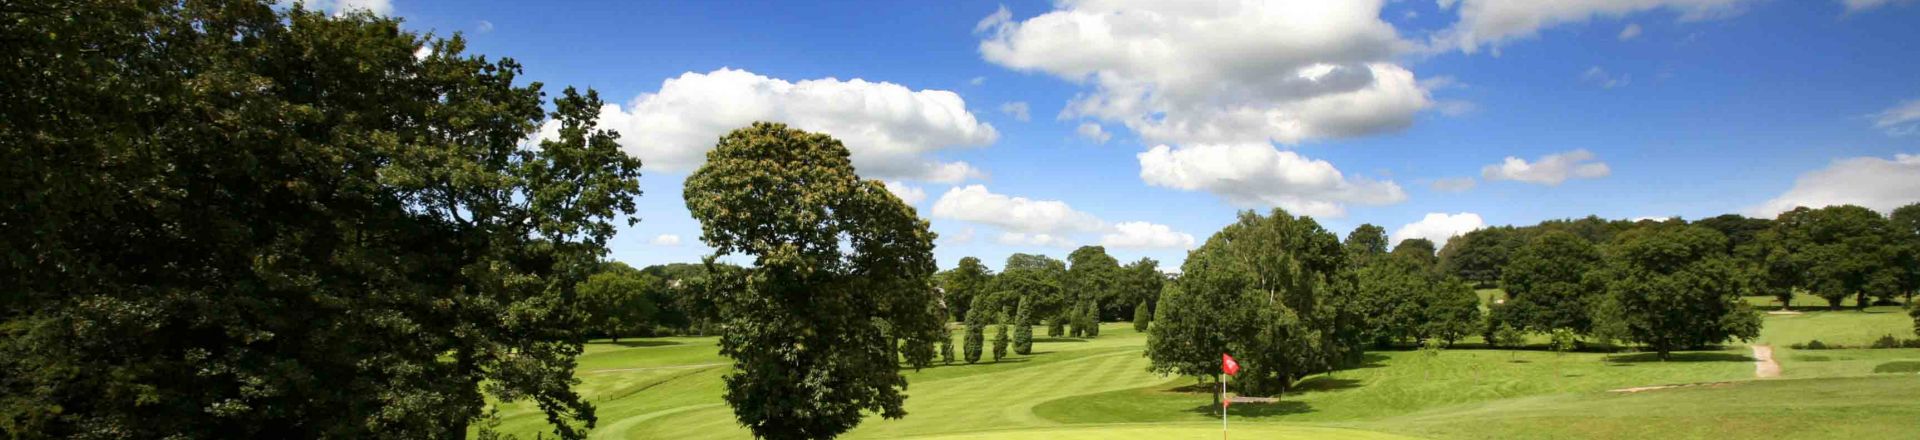 Championship Priory at Breadsall Priory Country Club